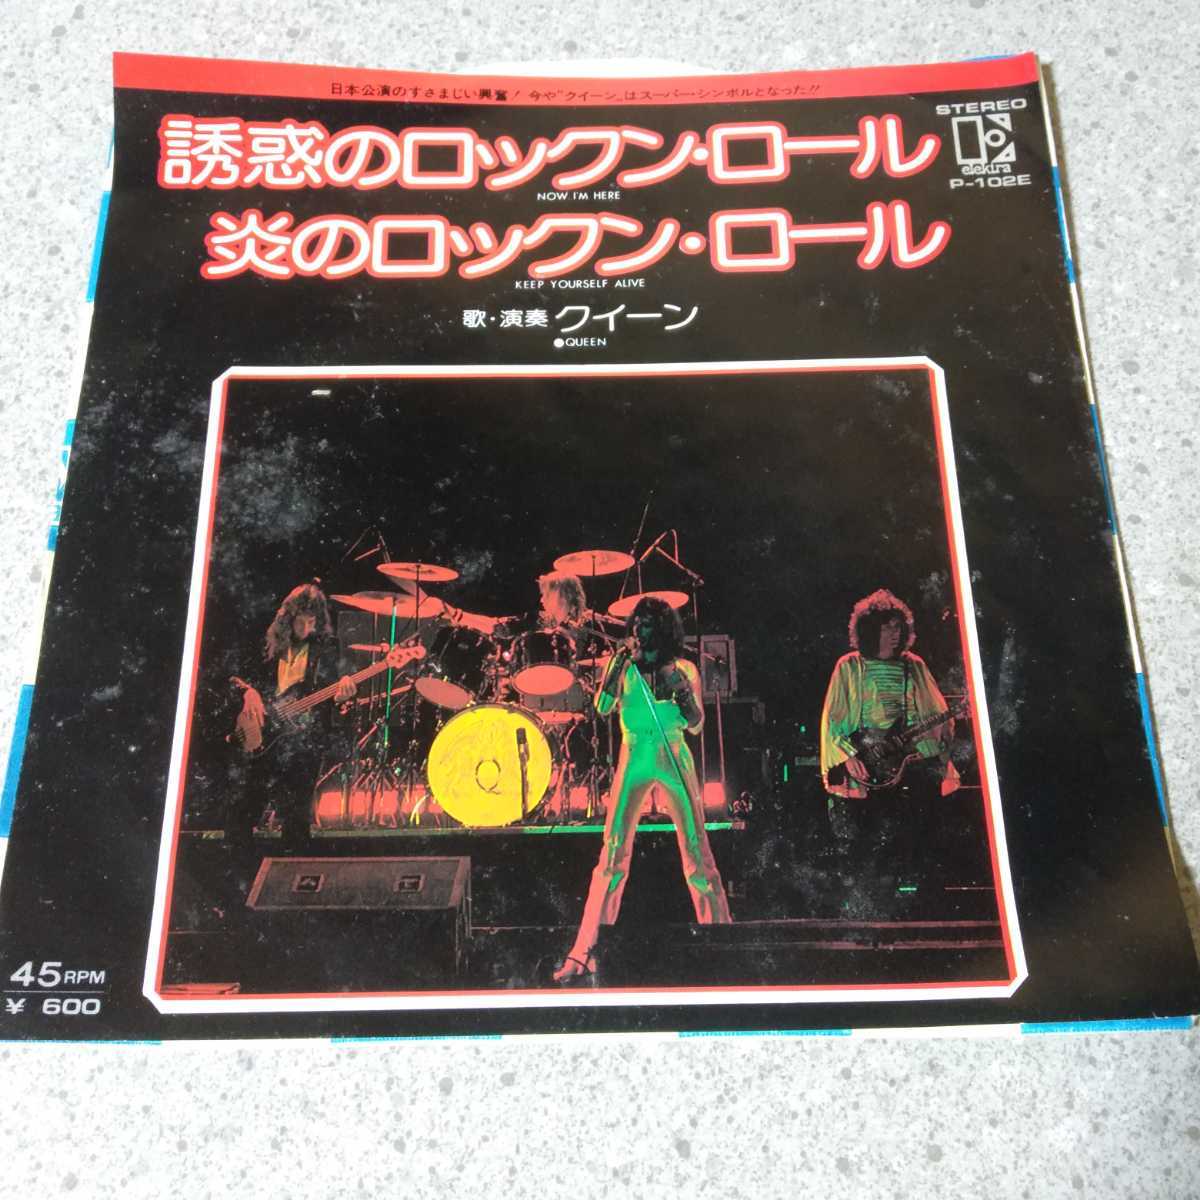 EPレコード　QUEEN　クイーン　誘惑のロックン・ロール NOW I'M HERE　炎のロックン・ロール KEEP YOURSELF ALIVE 　OA-7_画像1